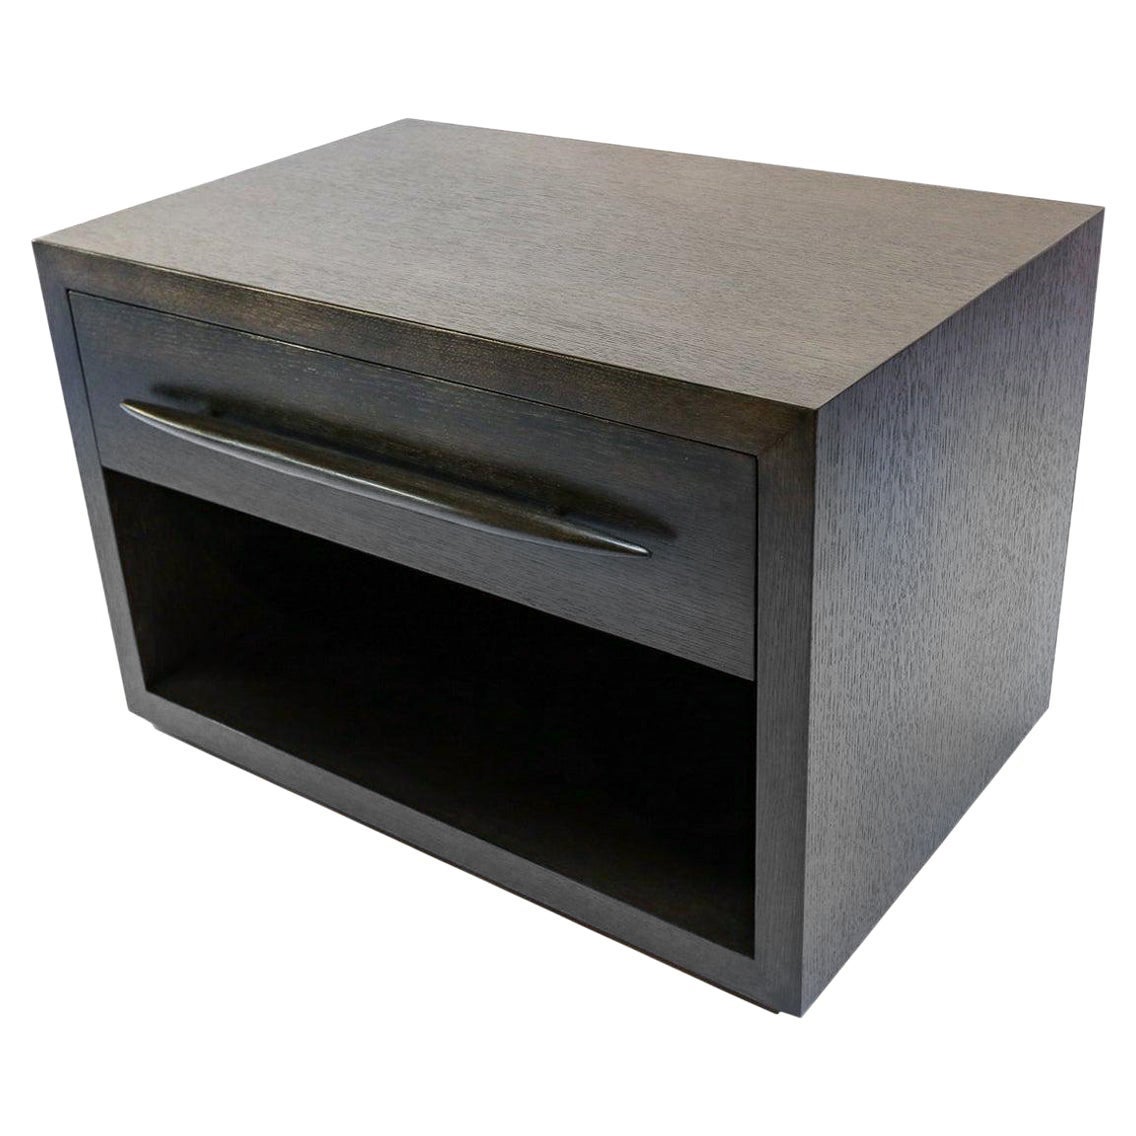 Custom Midcentury Style Dark Oak Nightstand by Adesso Imports For Sale